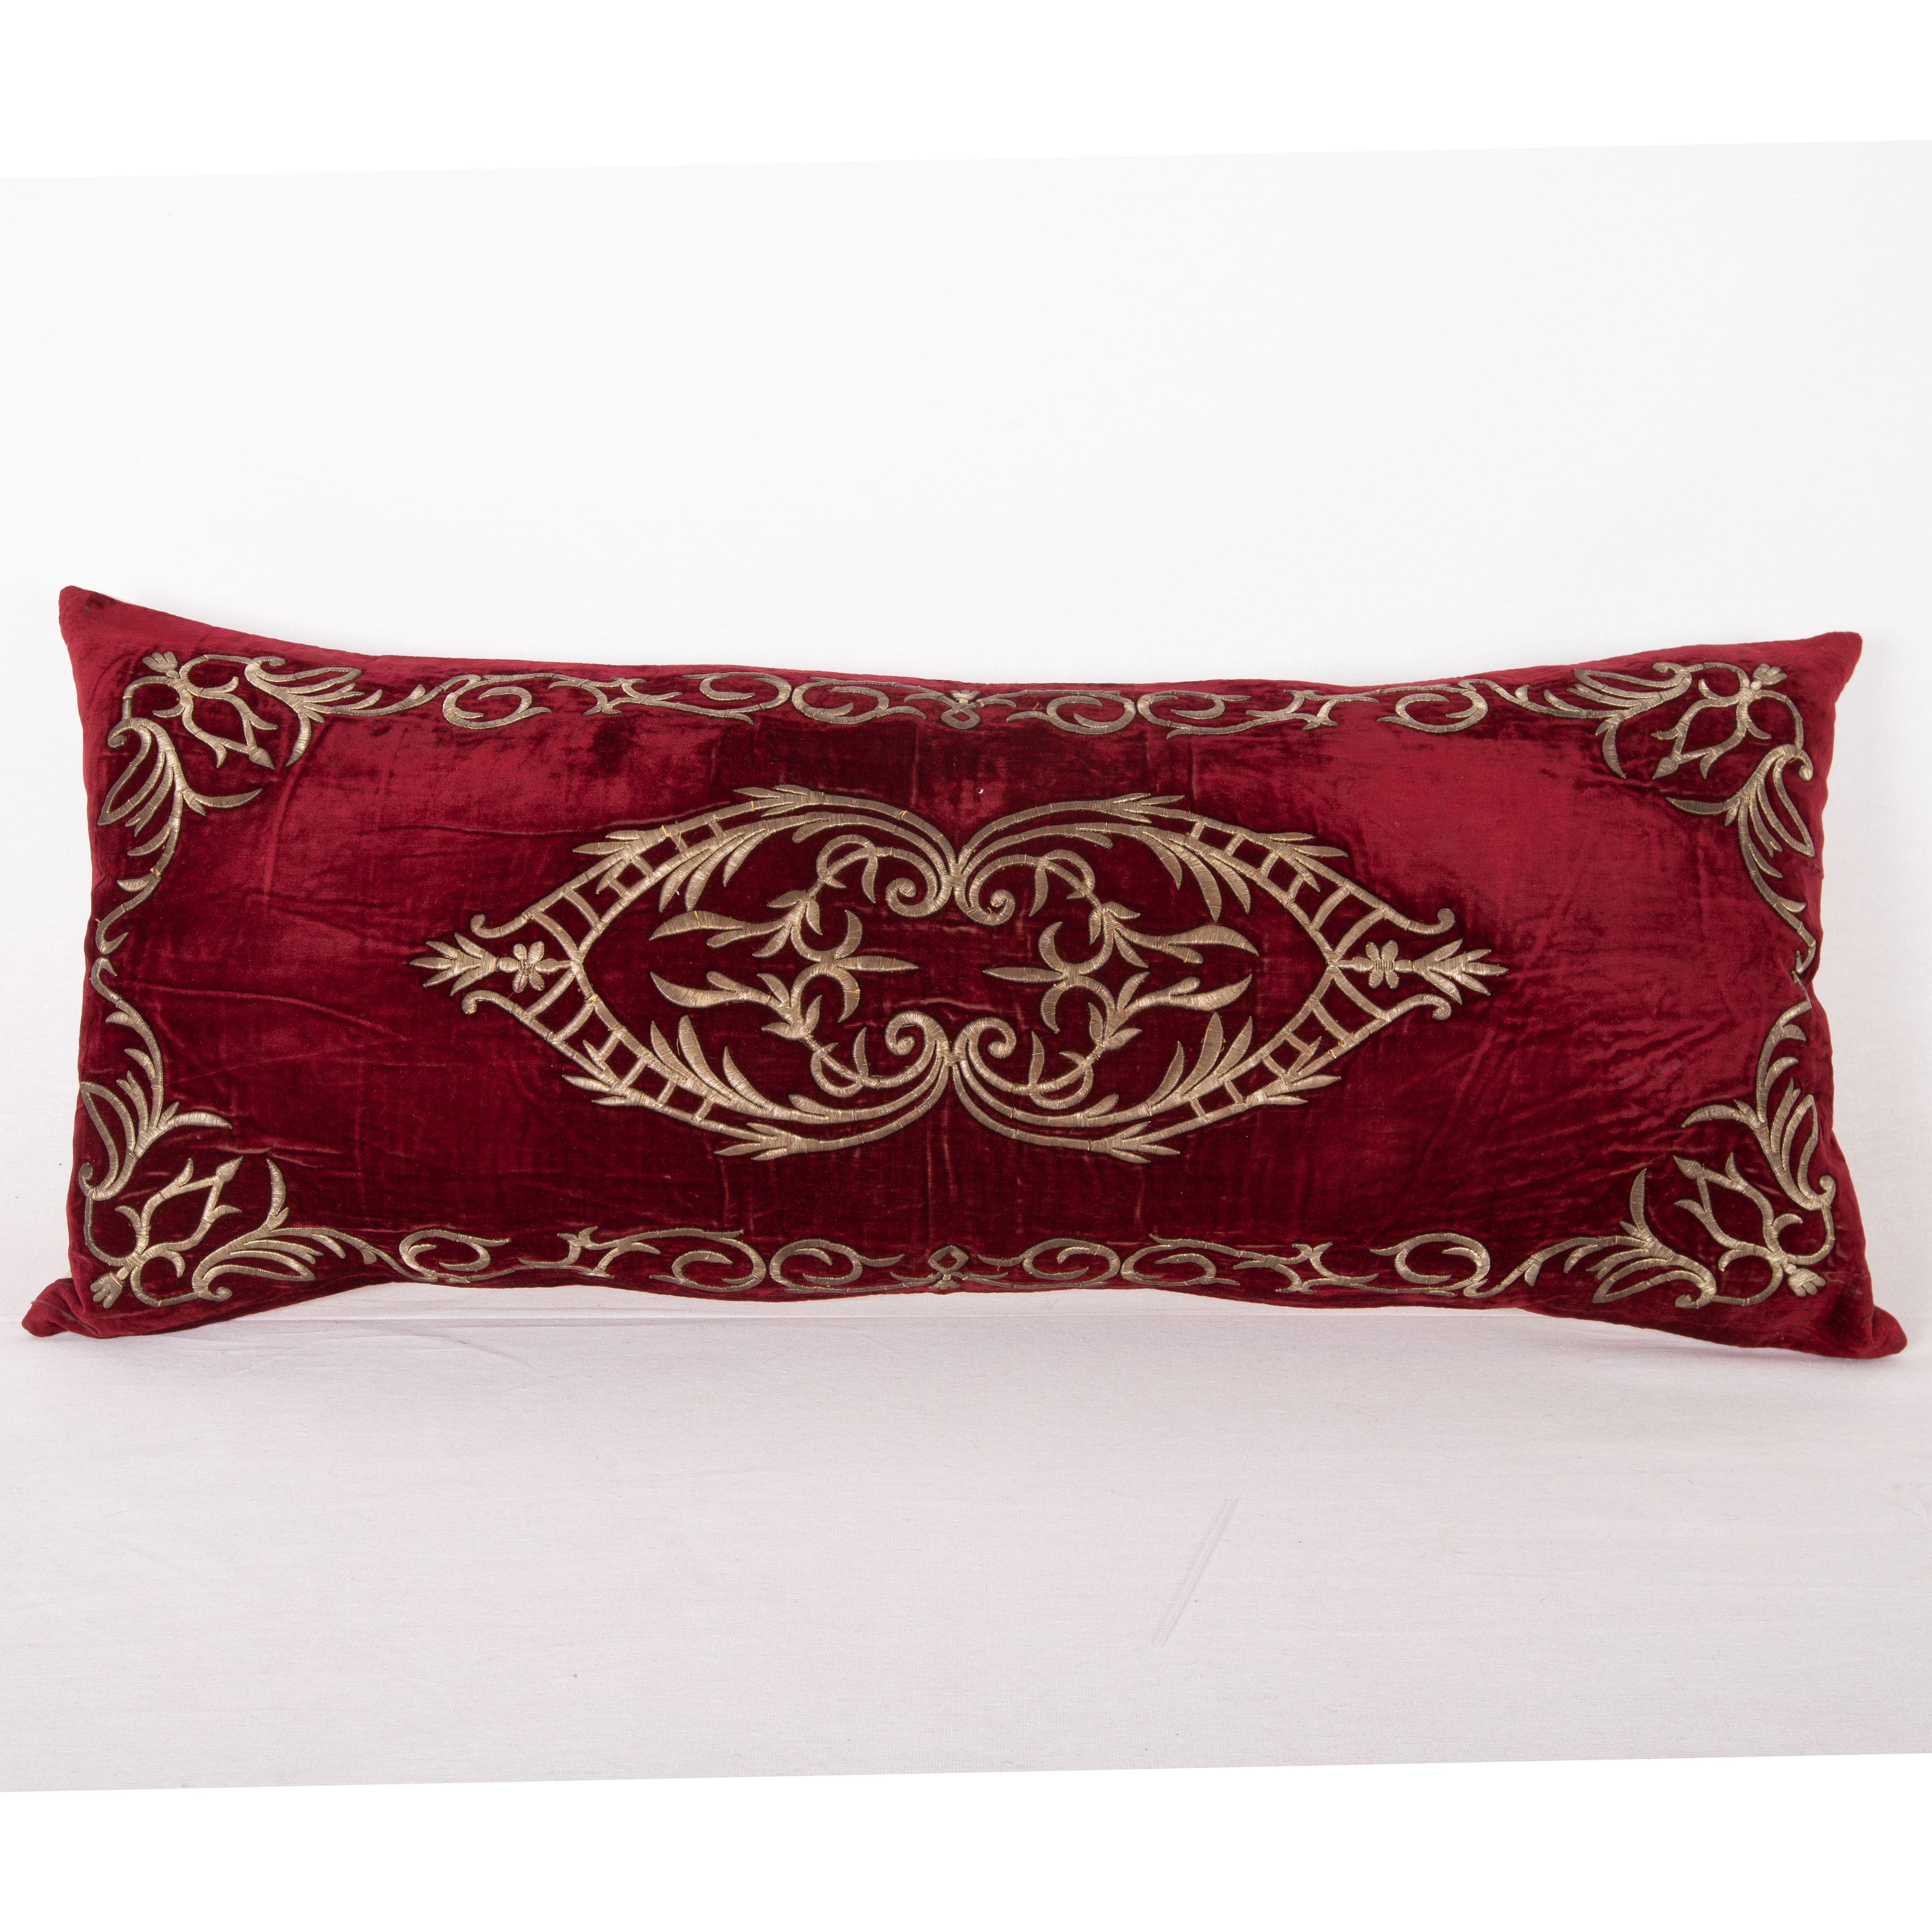 This a a very good example to silk velvet Sara pillows. It is the original size since we have just replaced the backing.

It doe not come with an insert but a bag made to the size to accommodate insert materials.
Linen in the back.
Zipper